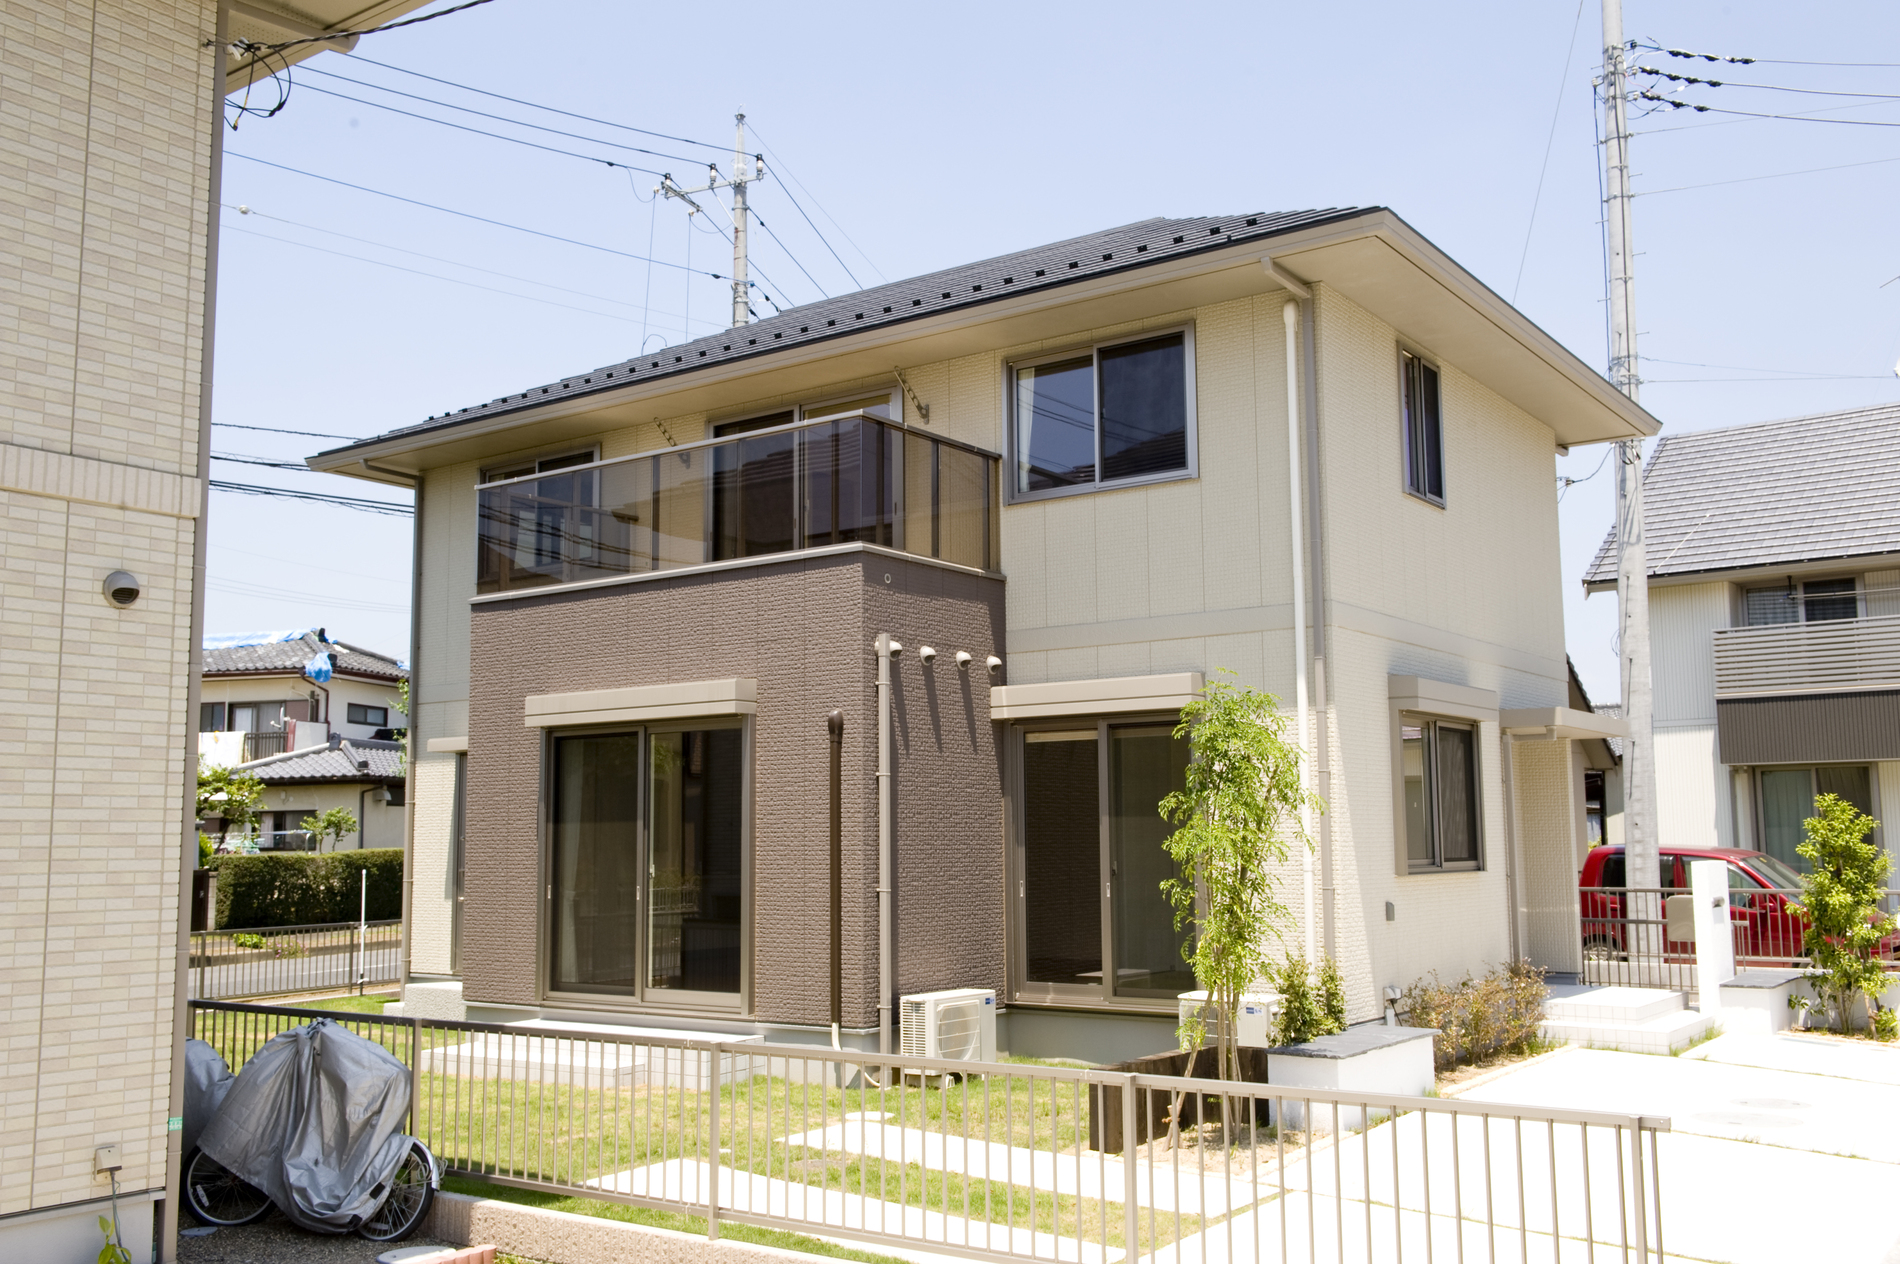 Building plan example (exterior photos). Building plan example (appearance) Building Price 20.5 million yen, Building area 116 sq m (expenses by)